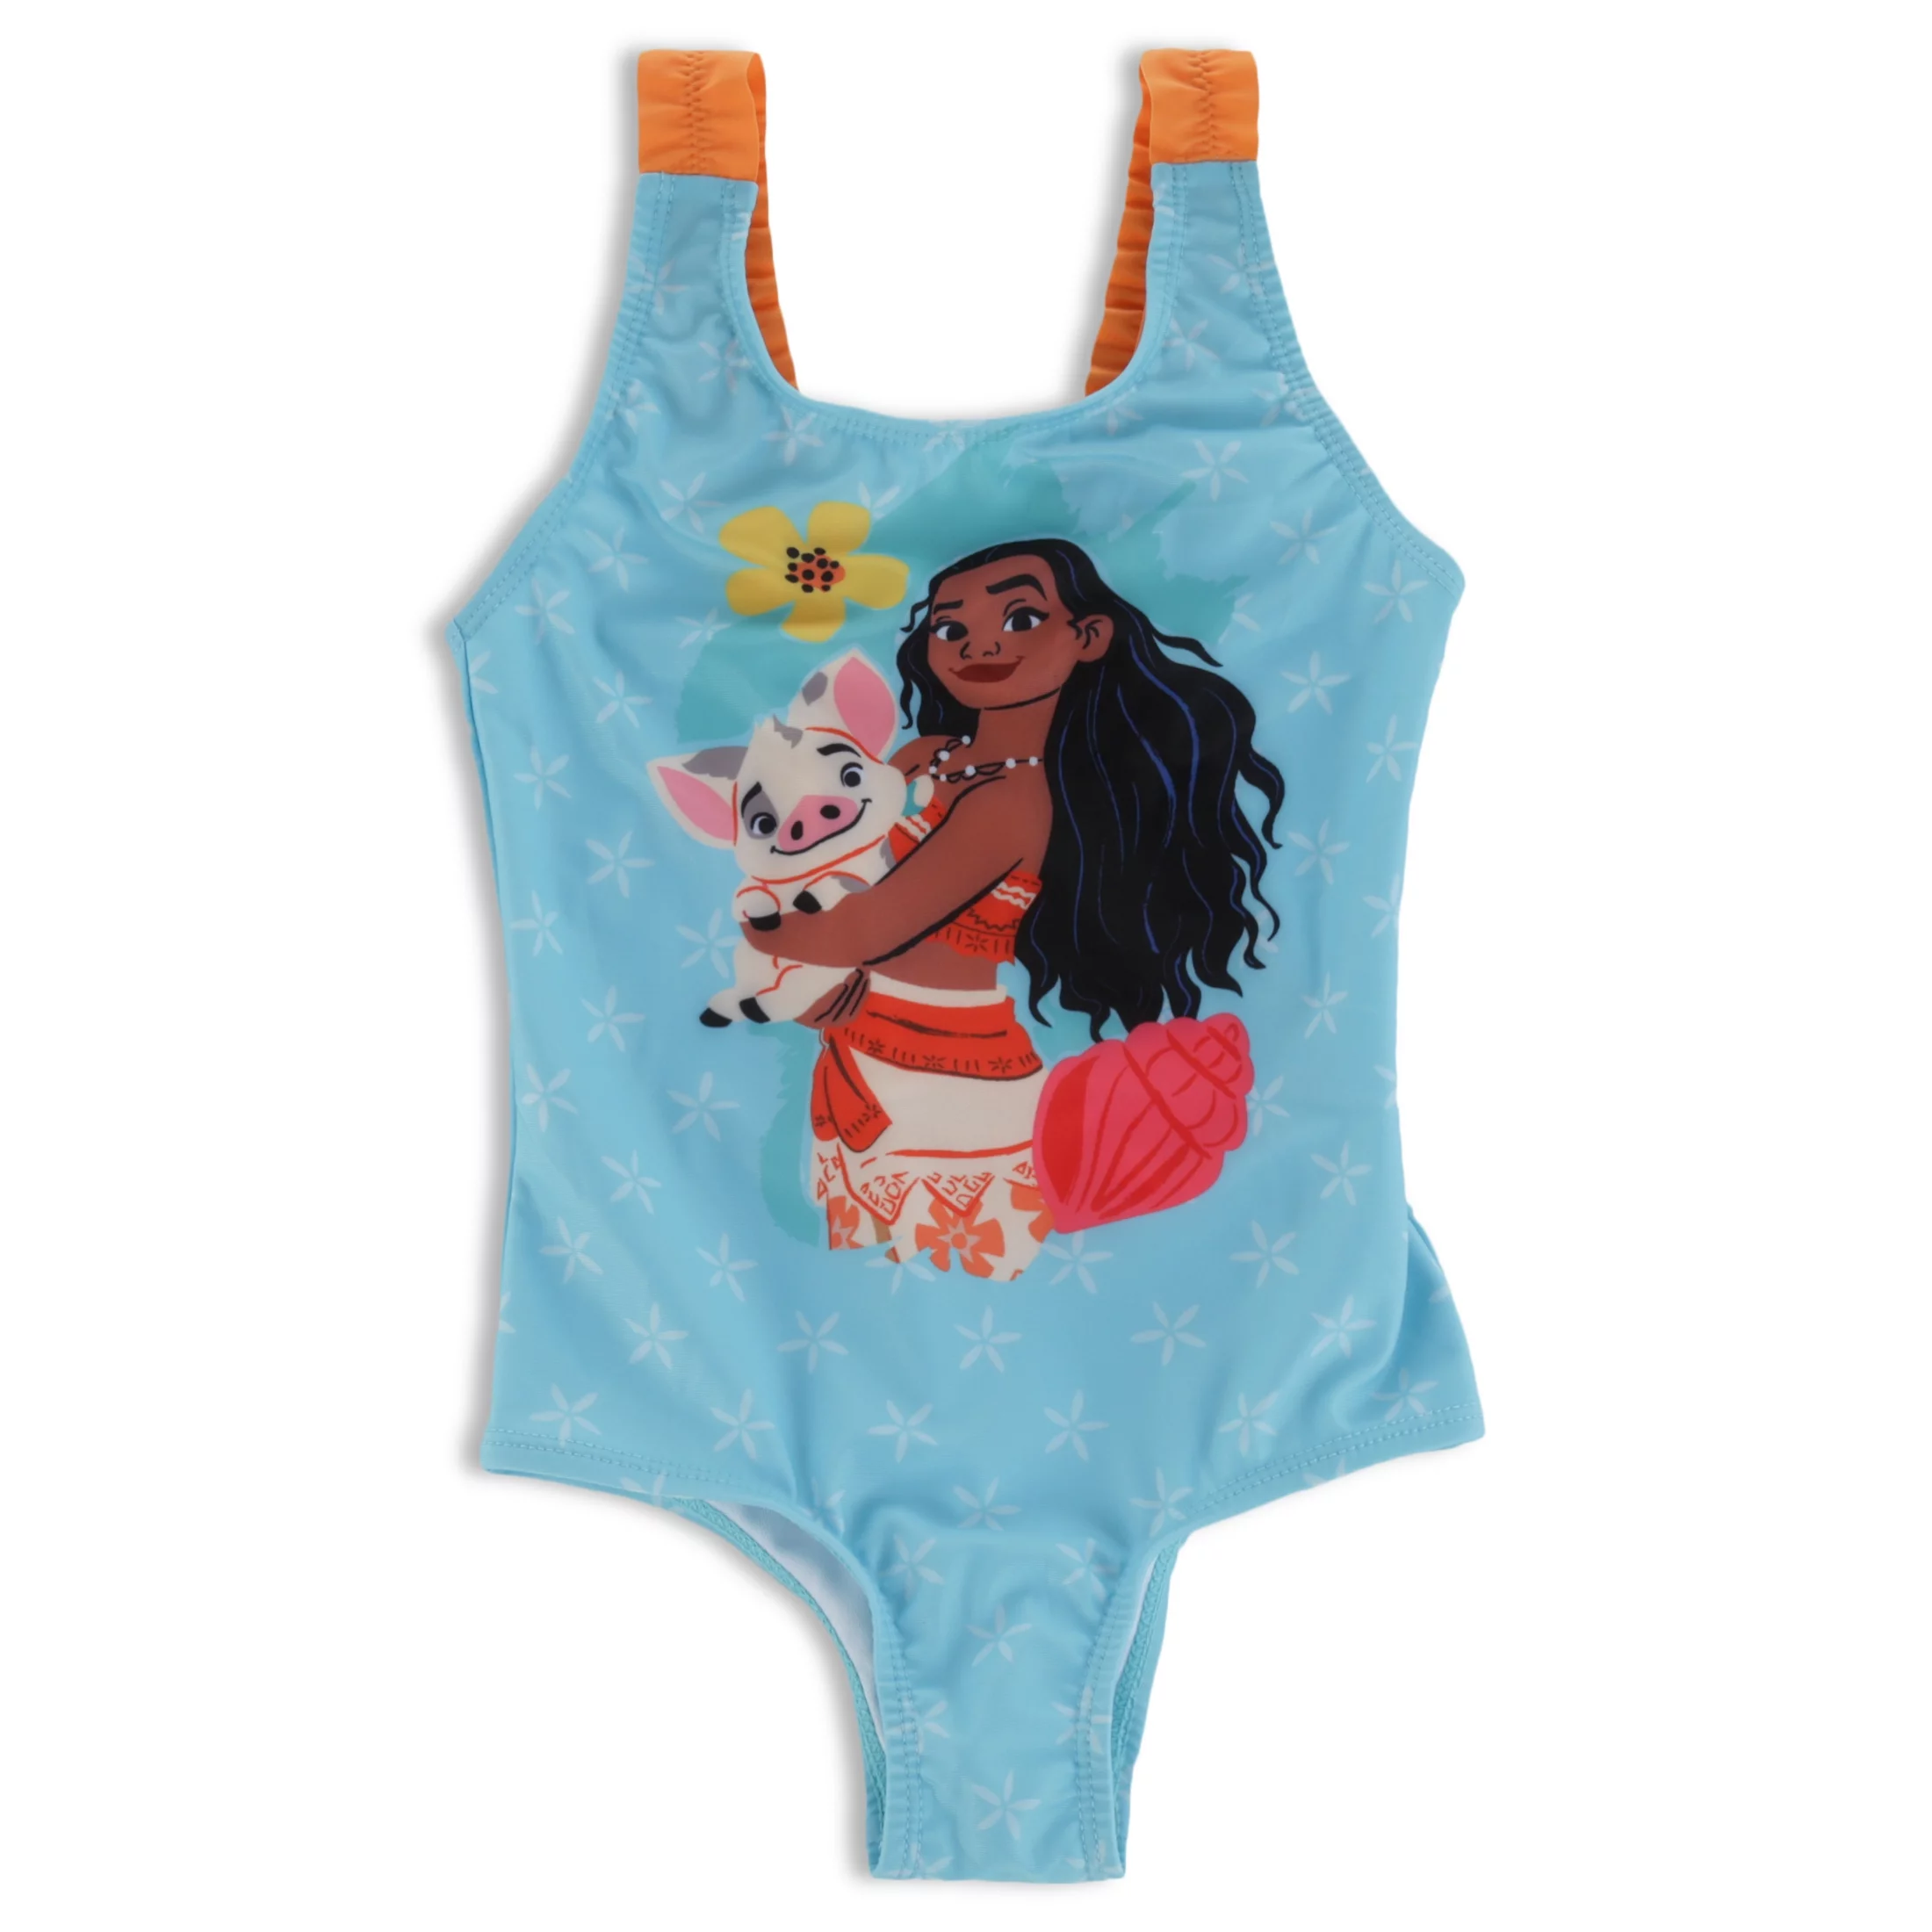 Moana Toddler Girl Swimsuit One Piece, Sizes 2T-4T